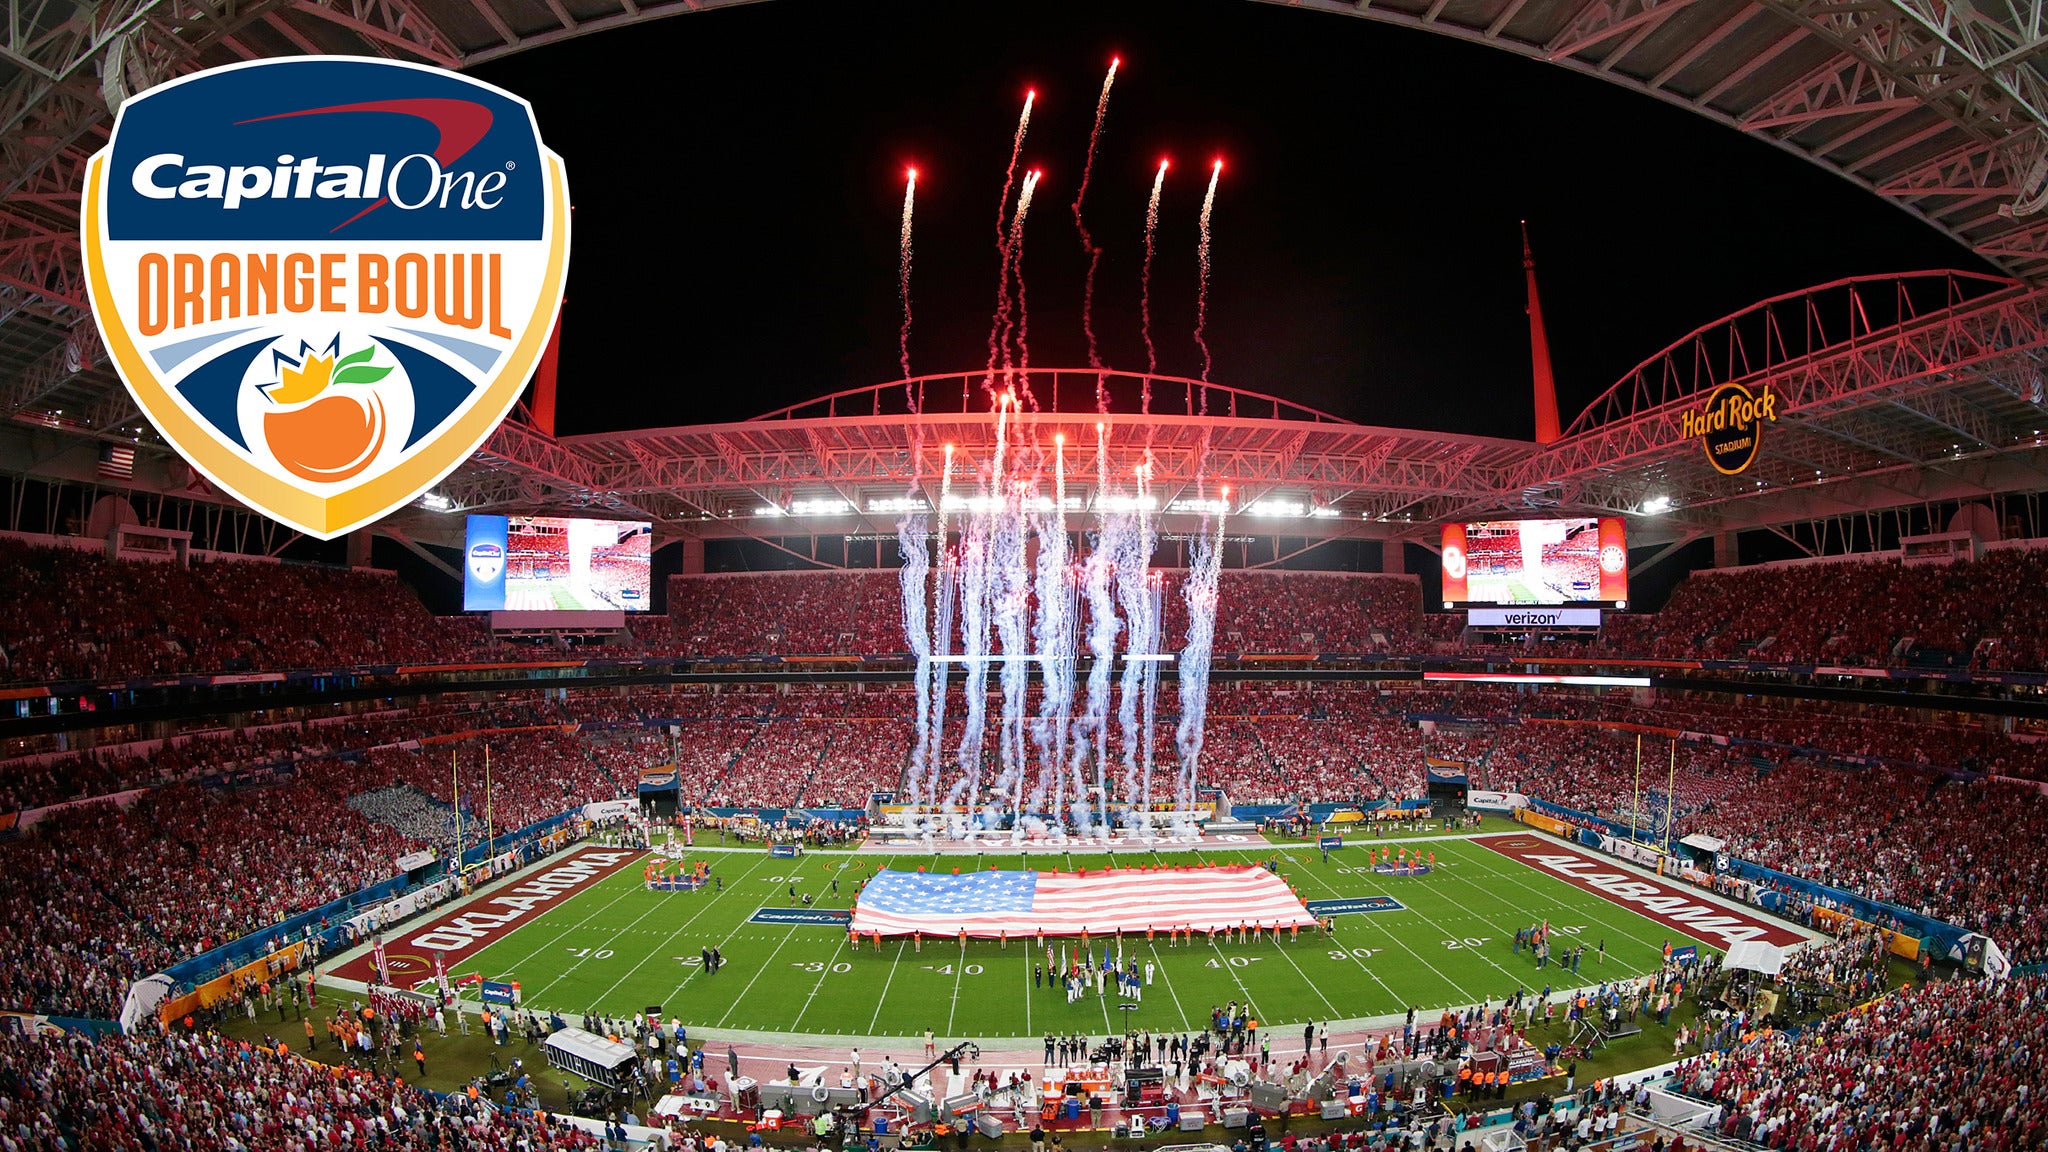 Playoff Semifinal at the Capital One Orange Bowl: Georgia vs Michigan in Miami promo photo for Exclusive presale offer code